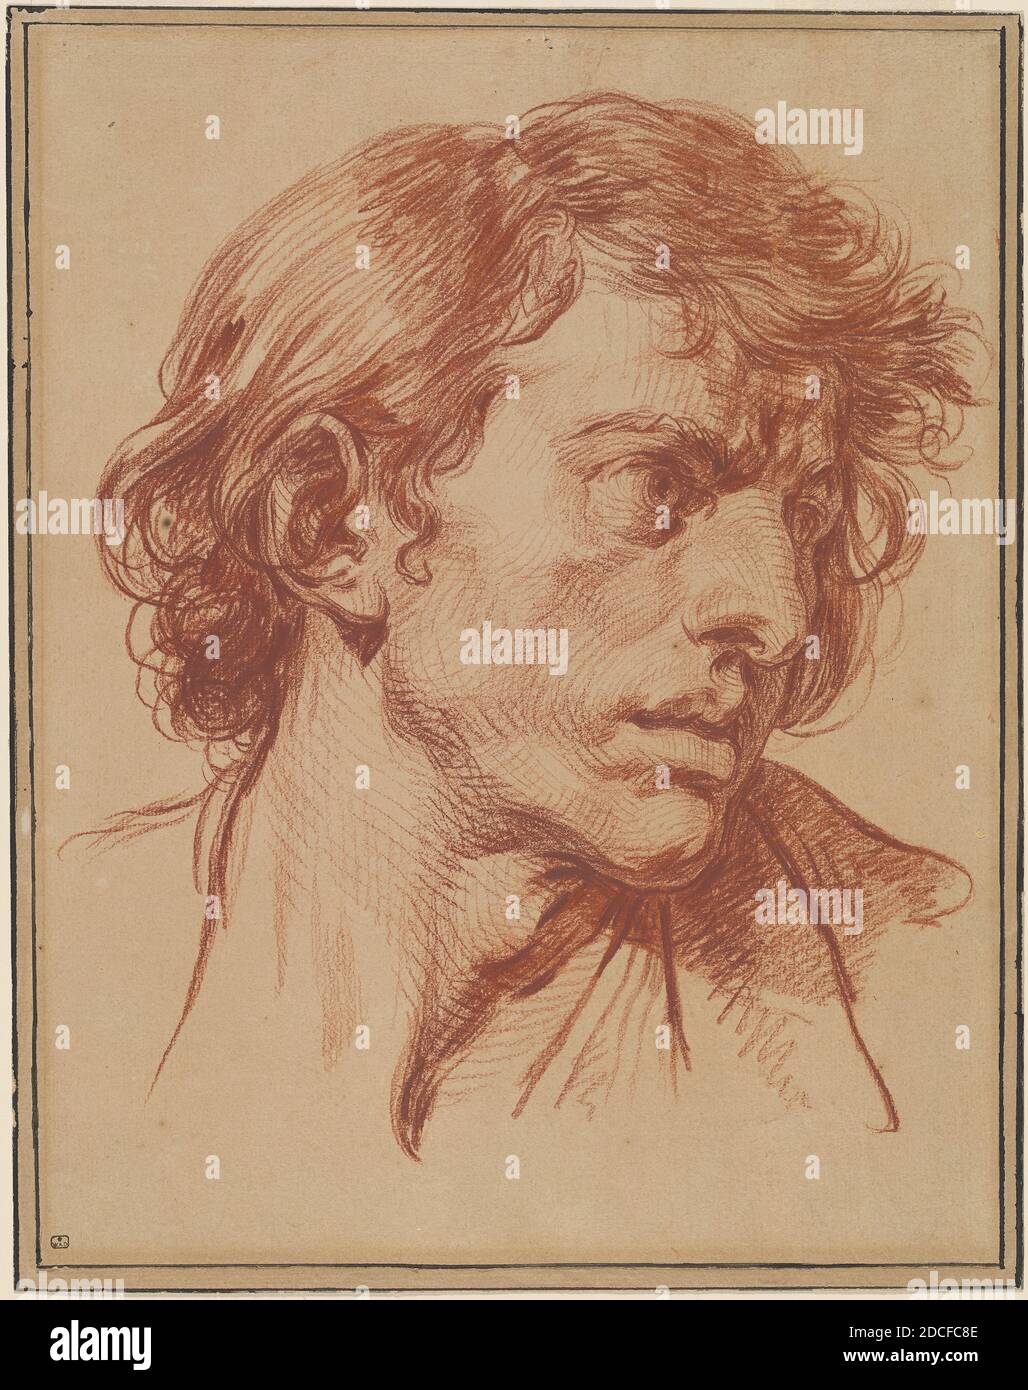 Jean-Baptiste Greuze, (artist), French, 1725 - 1805, The Ungrateful Son, c. 1770, red chalk on brown laid paper with framing line in black ink, overall: 42.7 x 33.1 cm (16 13/16 x 13 1/16 in.), Gift in memory of Douglas Huntly Gordon and in Honor of the 50th Anniversary of the National Gallery of Art Stock Photo